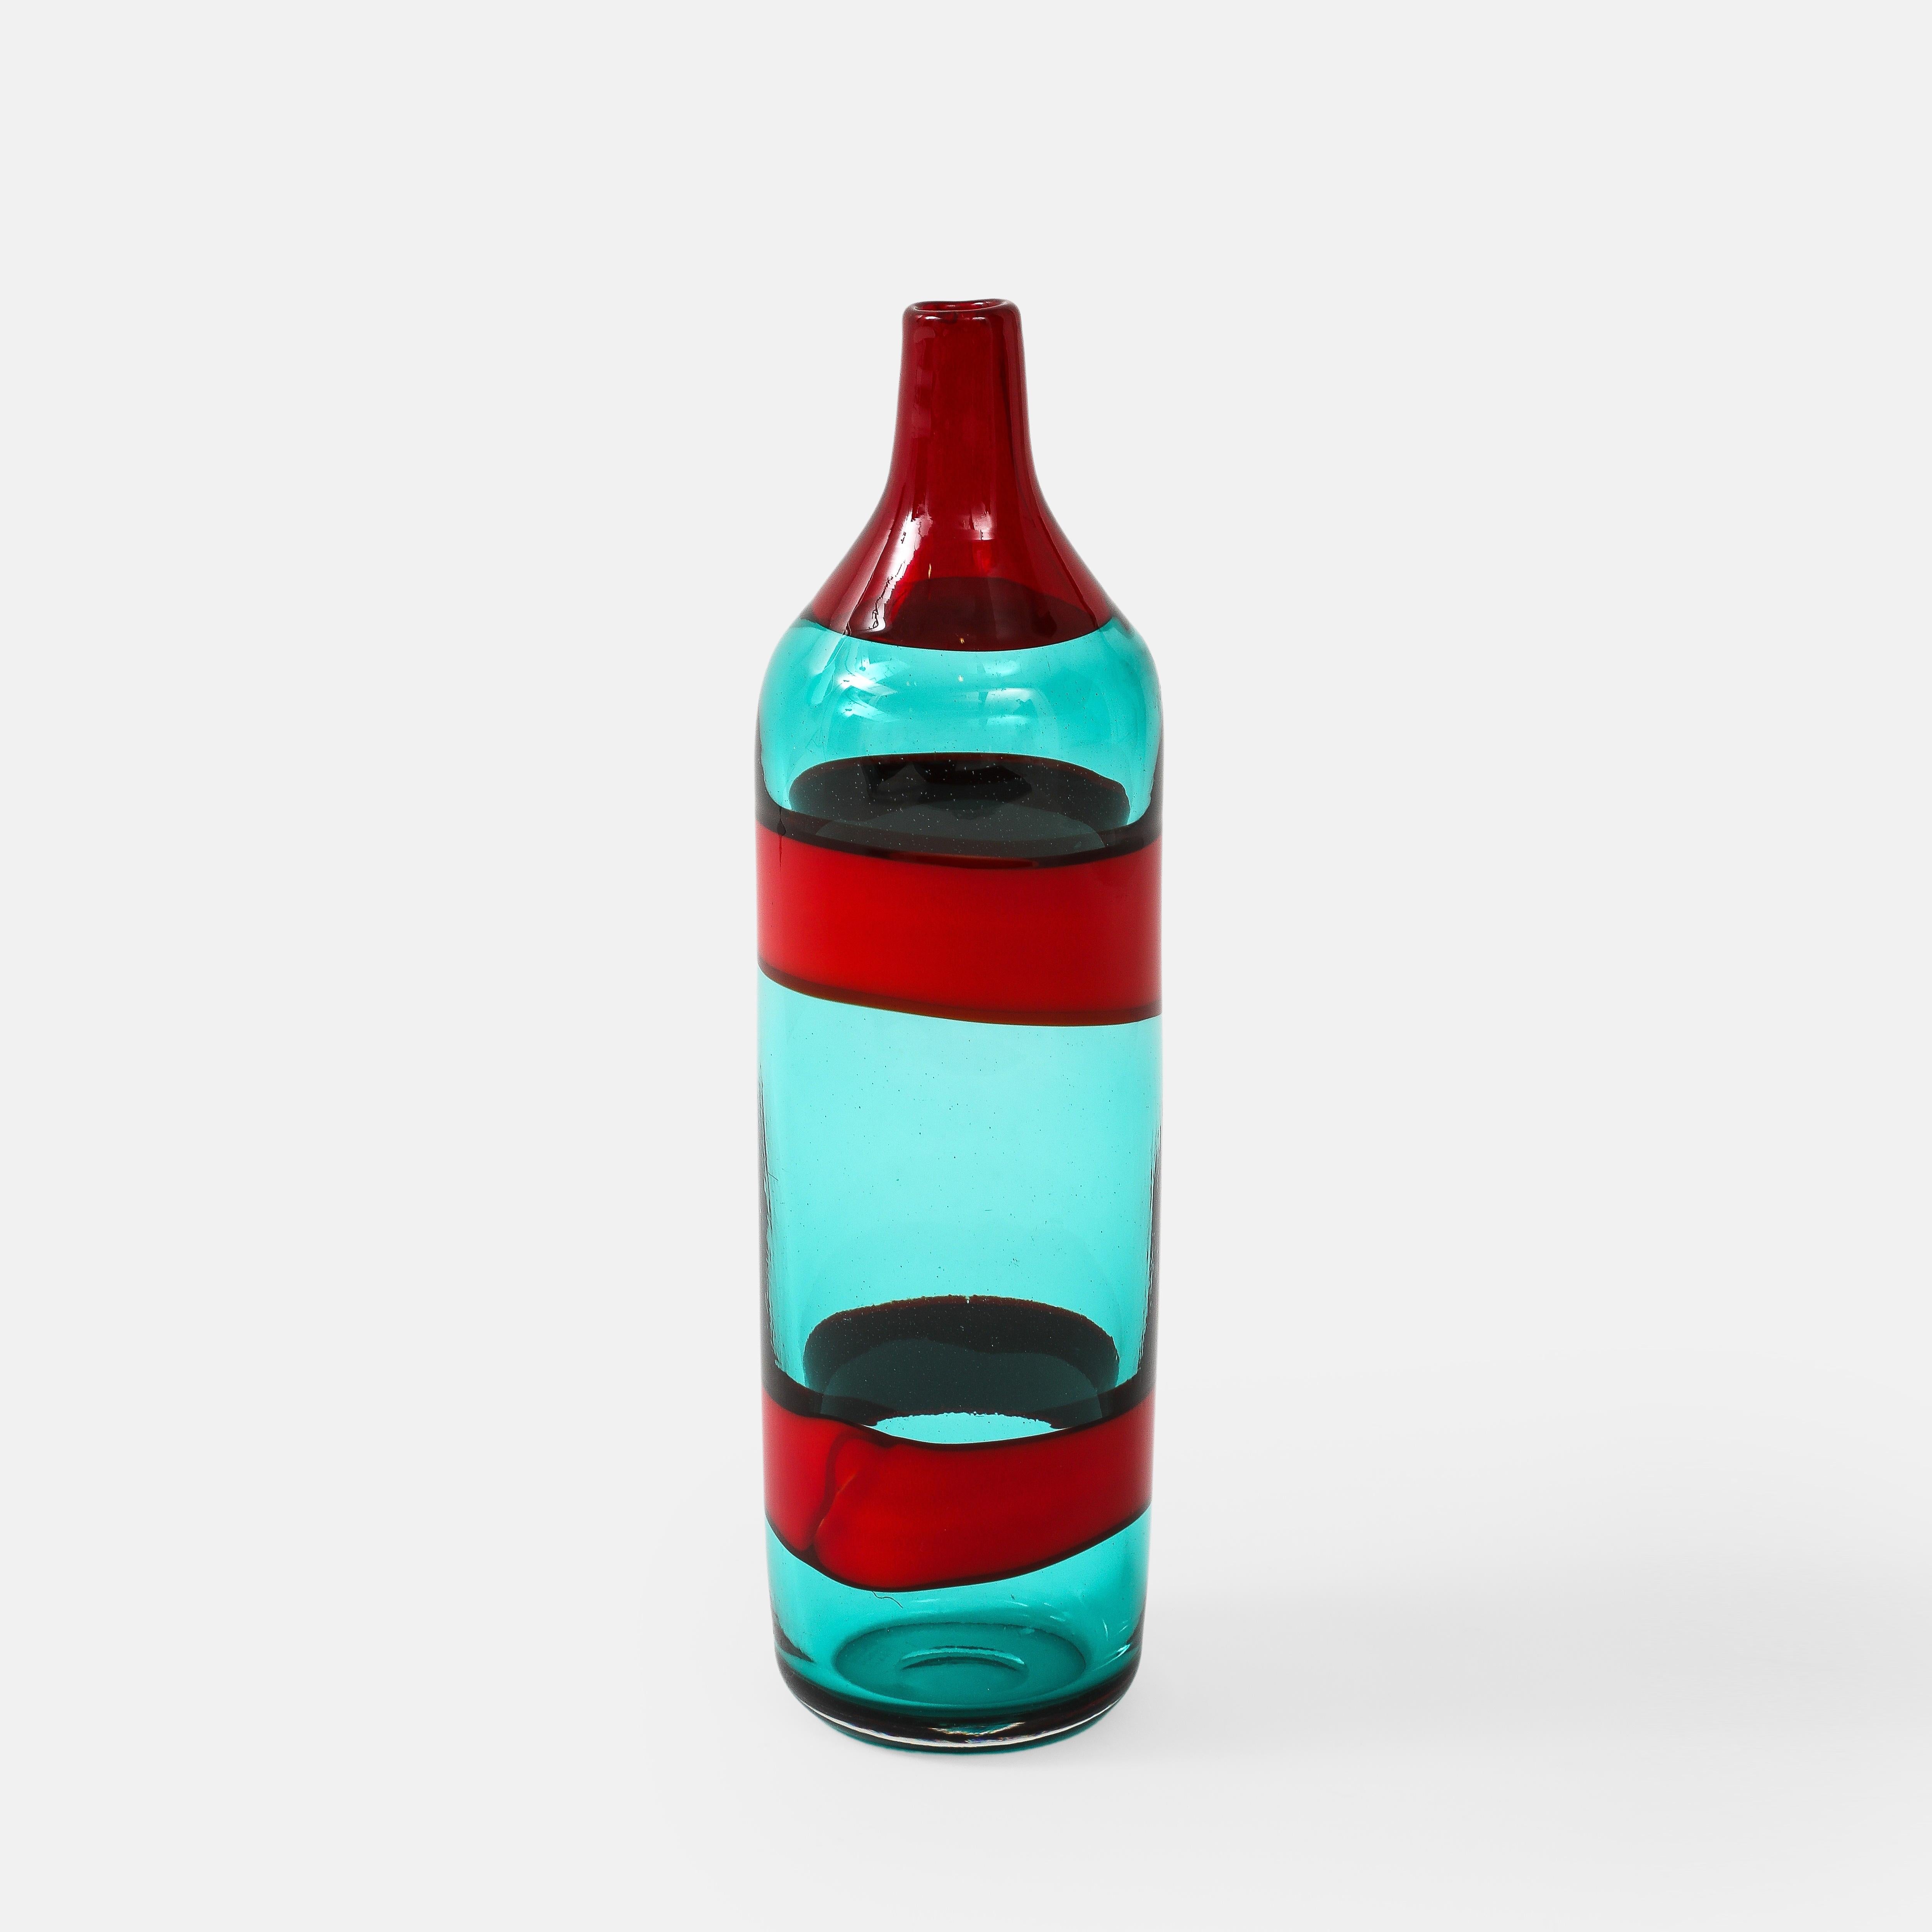 Fulvio Bianconi for Venini Fasce Orizzontali large bottle model 4315 in transparent blue green glass decorated on the body by two horizontal bands in opaque red and on the neck by a single transparent red band, Italy, circa 1950.  Although simple in